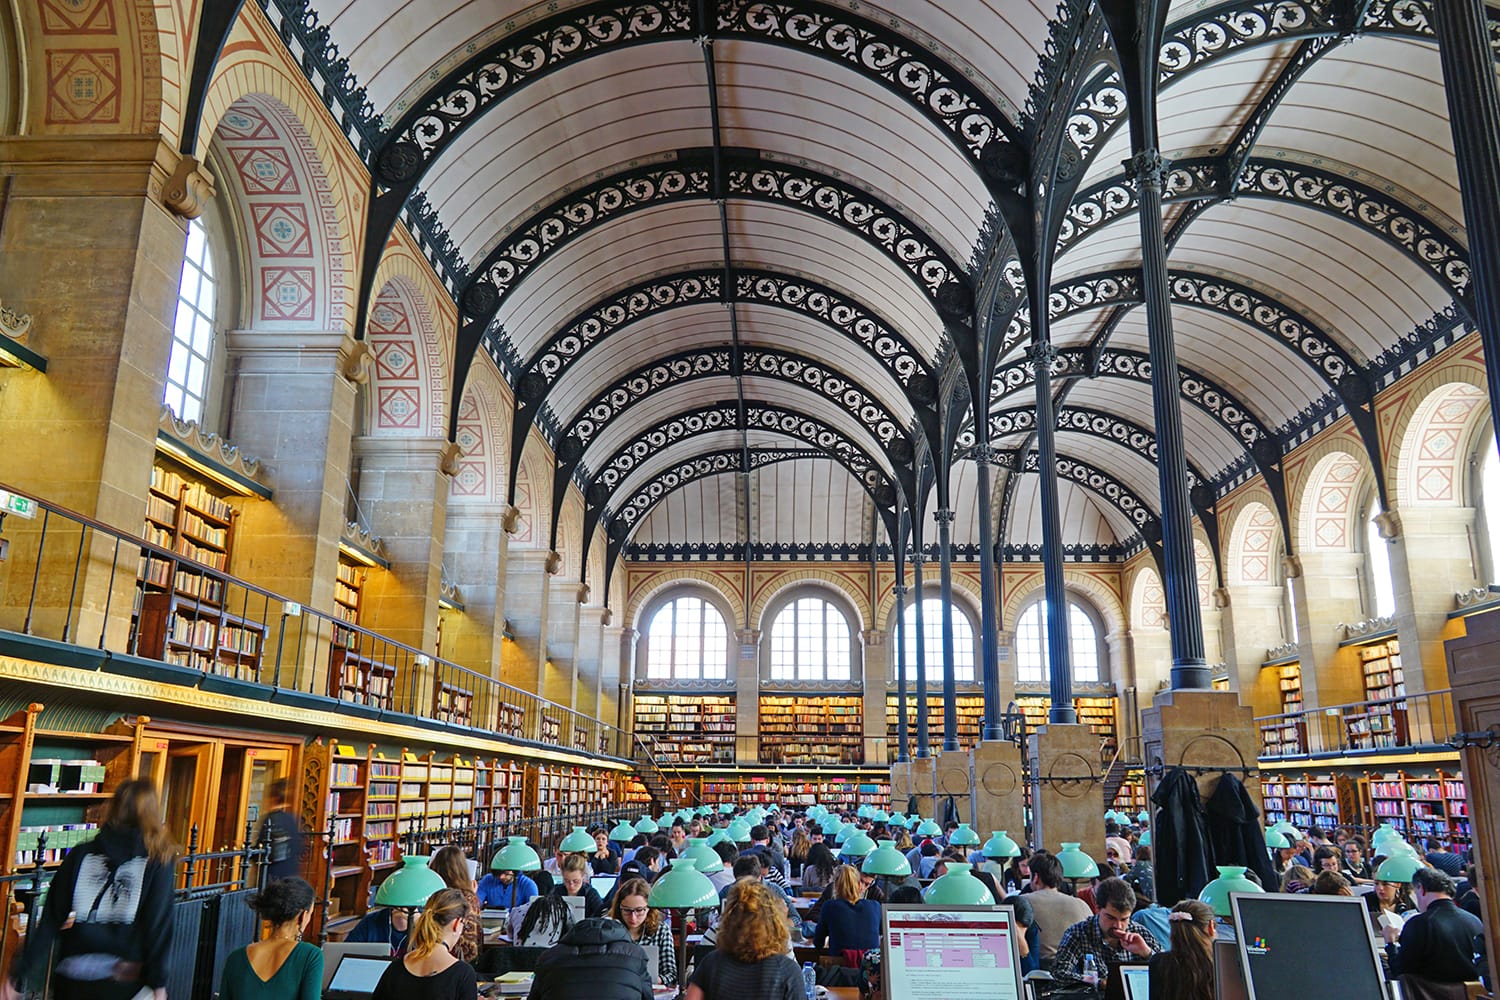 The Bibliotheque Sainte-Genevieve is a landmark public library in the fifth arrondissement of Paris, France